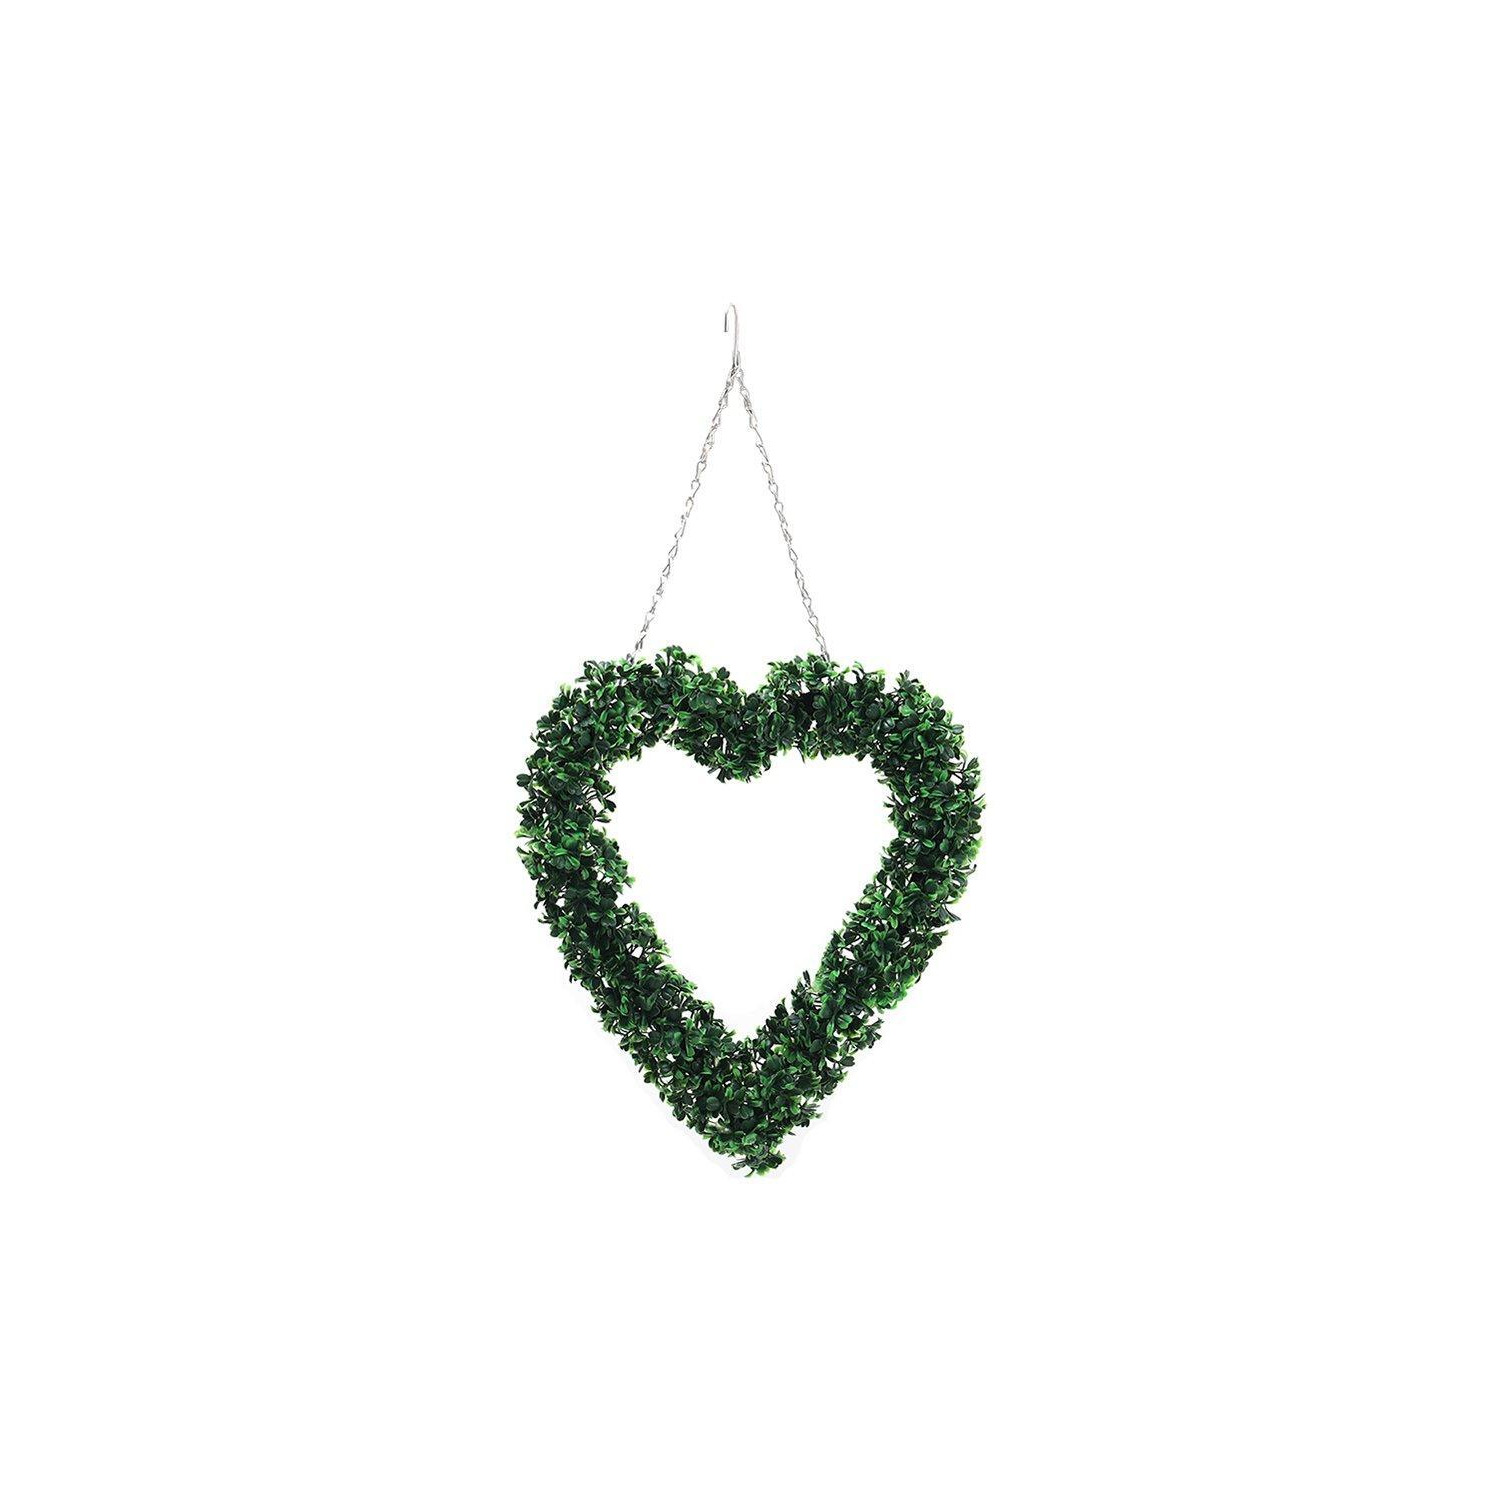 Artificial Boxwood Green Leaves Heart Wreath Decoration - image 1